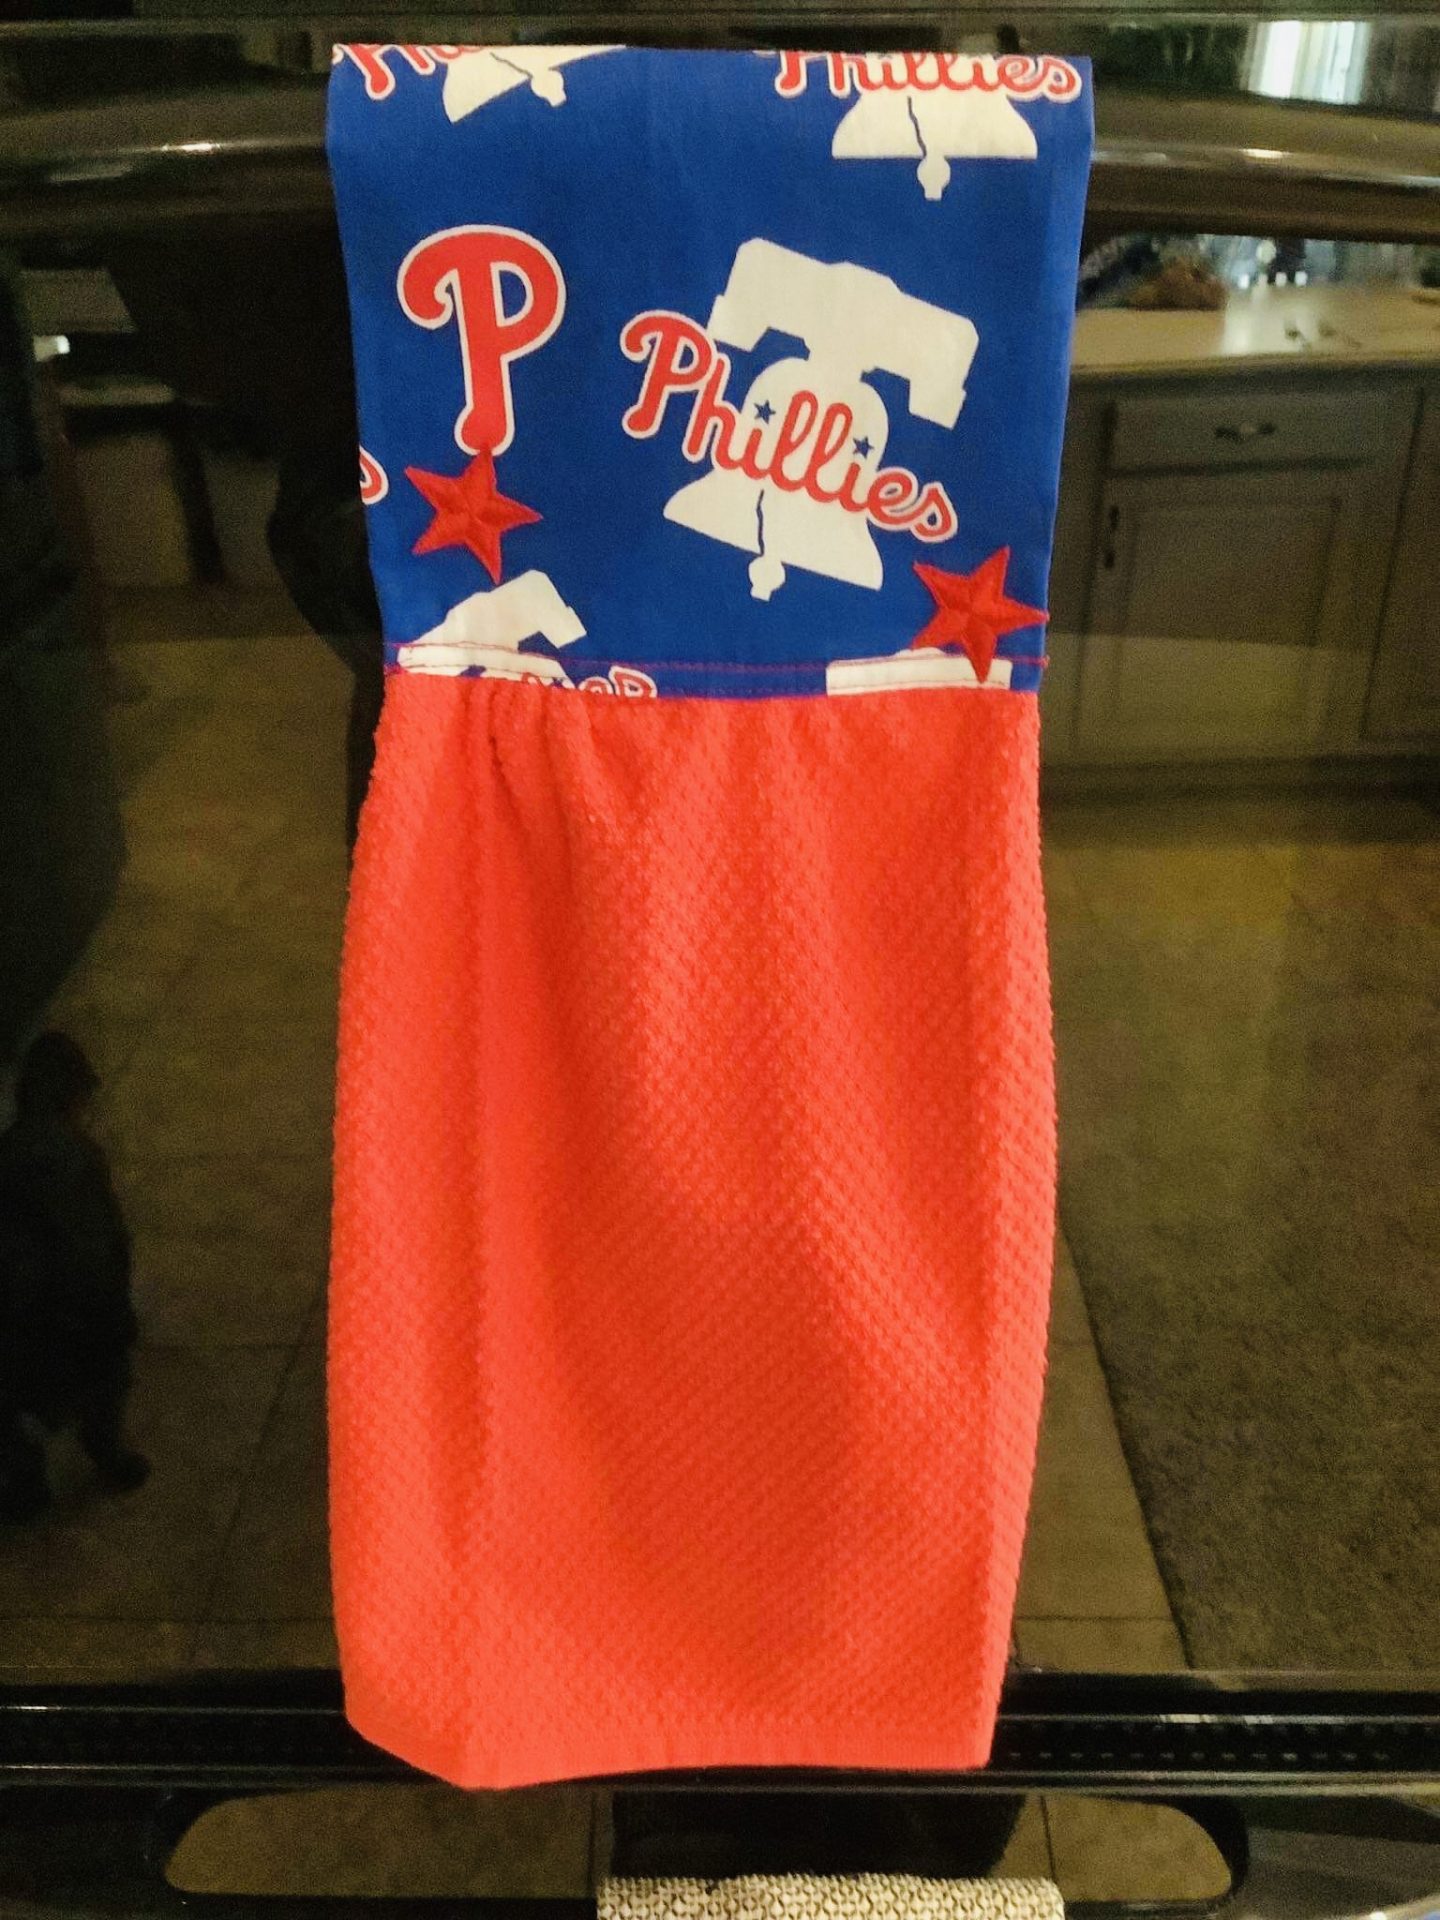 LIMITED EDITION PHILLIES HANGING TOWEL | Renee's Rescues